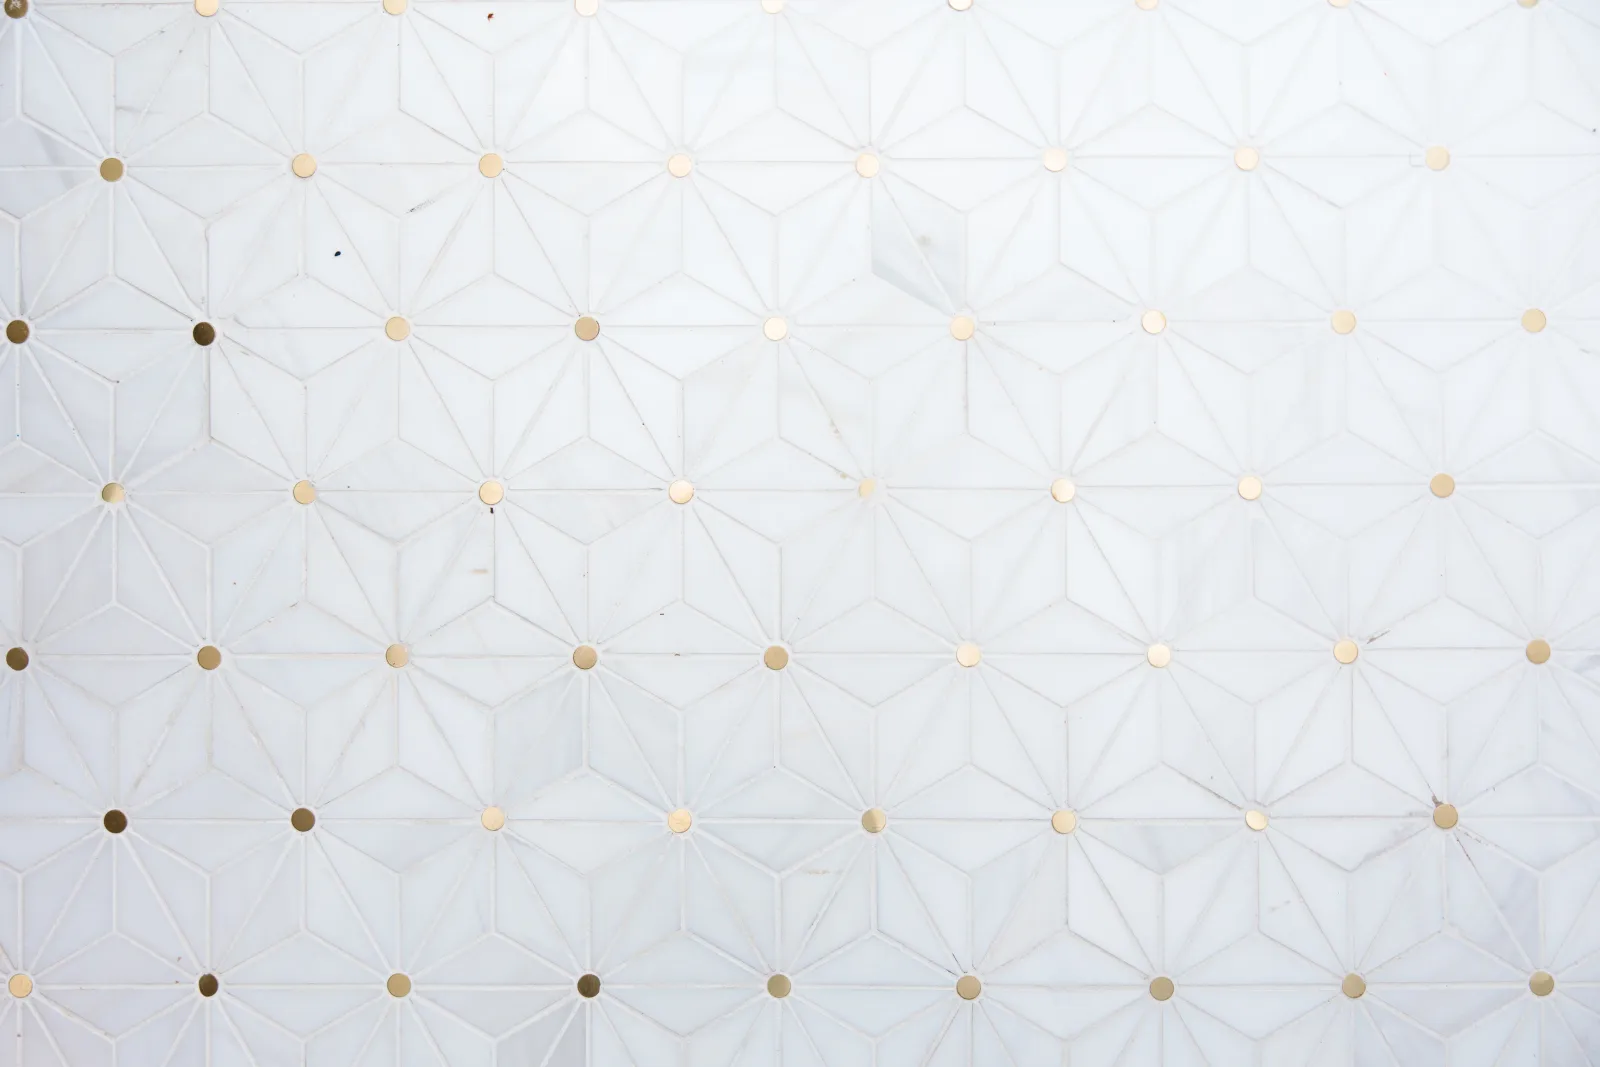 close up of a white tile geometric marble floor with gold circle tile inlaid